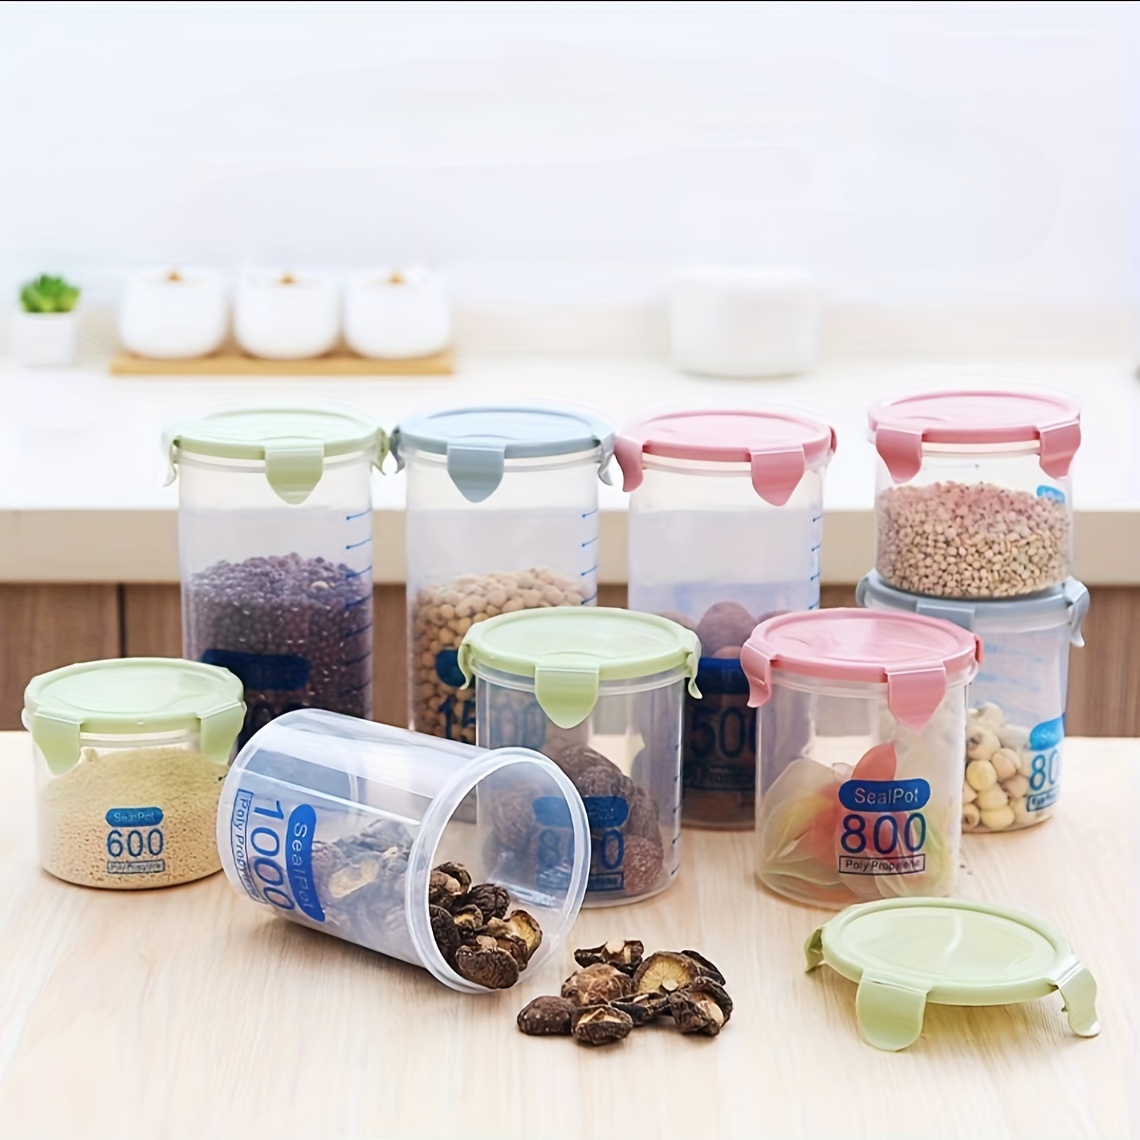 Haixing Plastic Clear Plastic Disposable Microwave Food Container